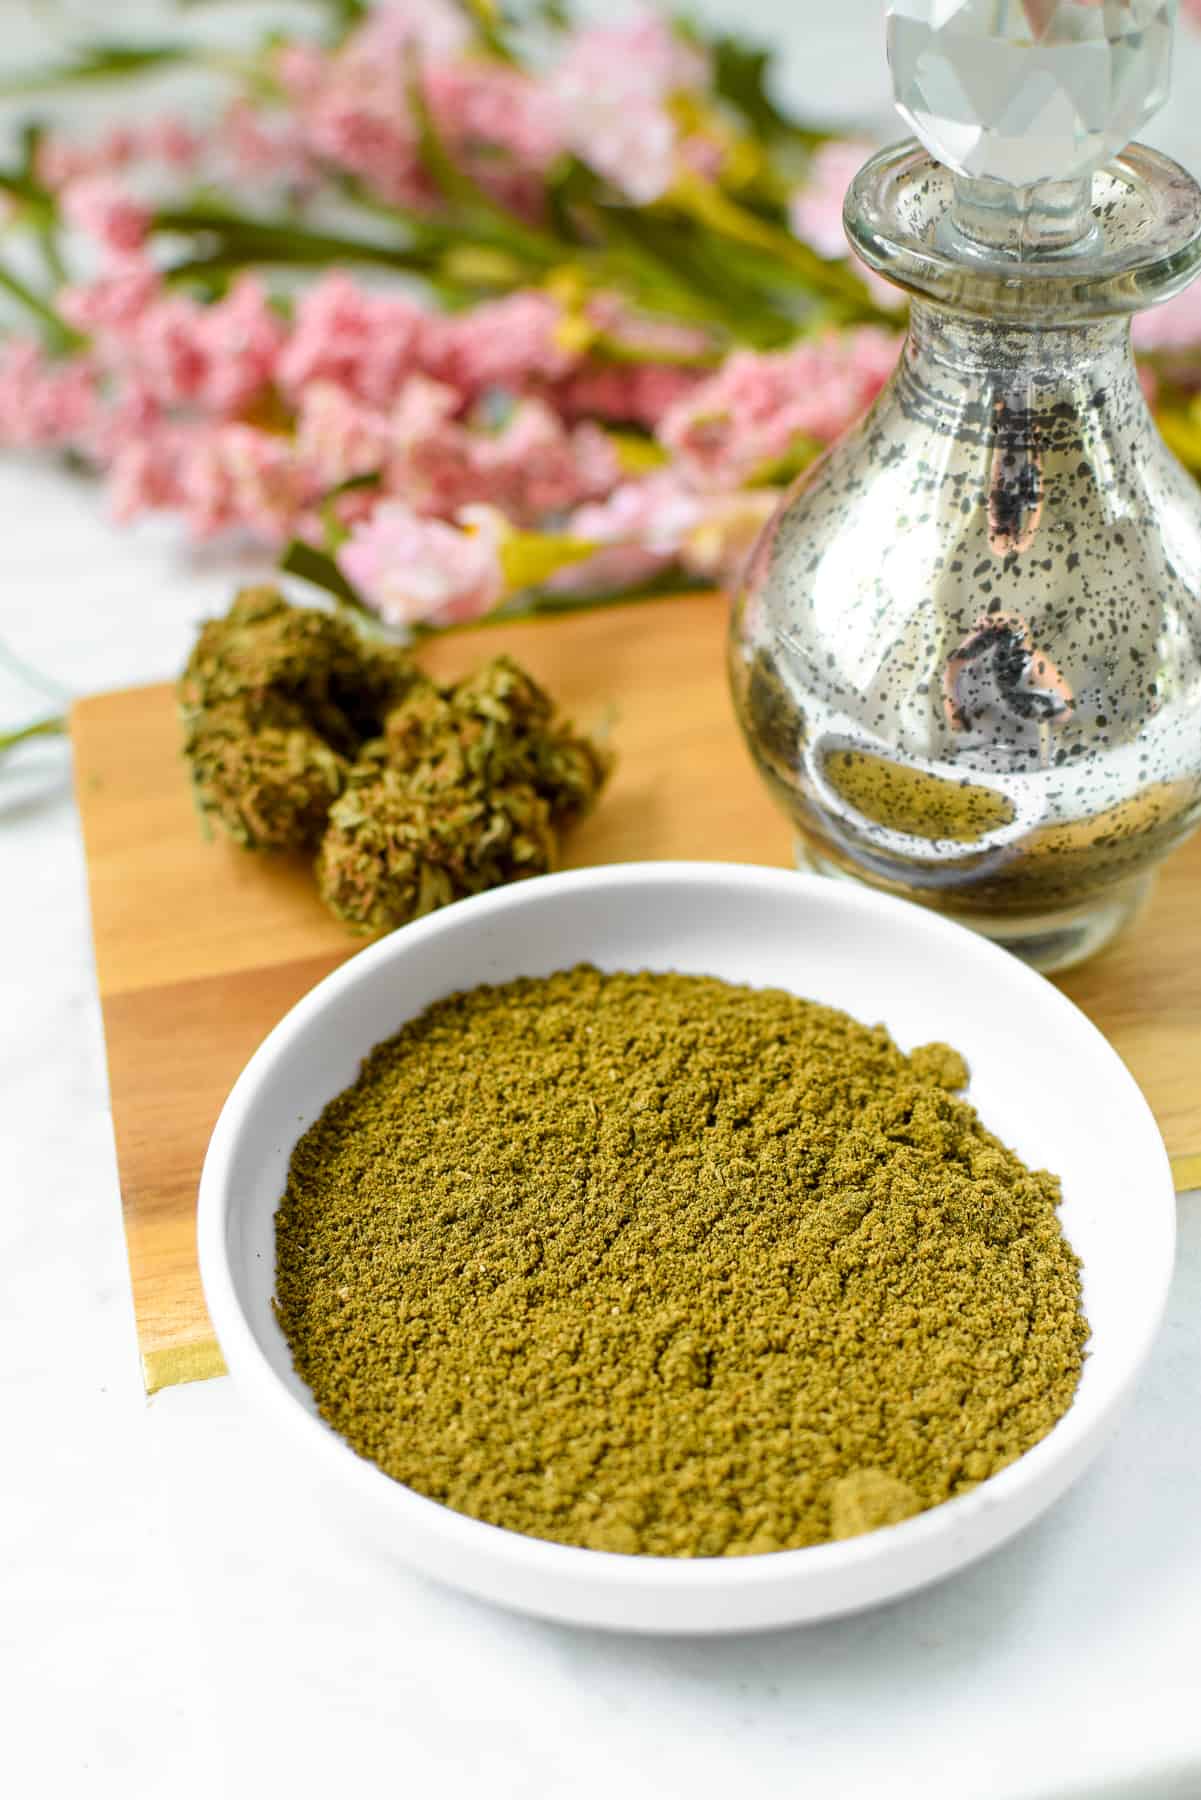 A shallow bowl of green powdered cannabis flower